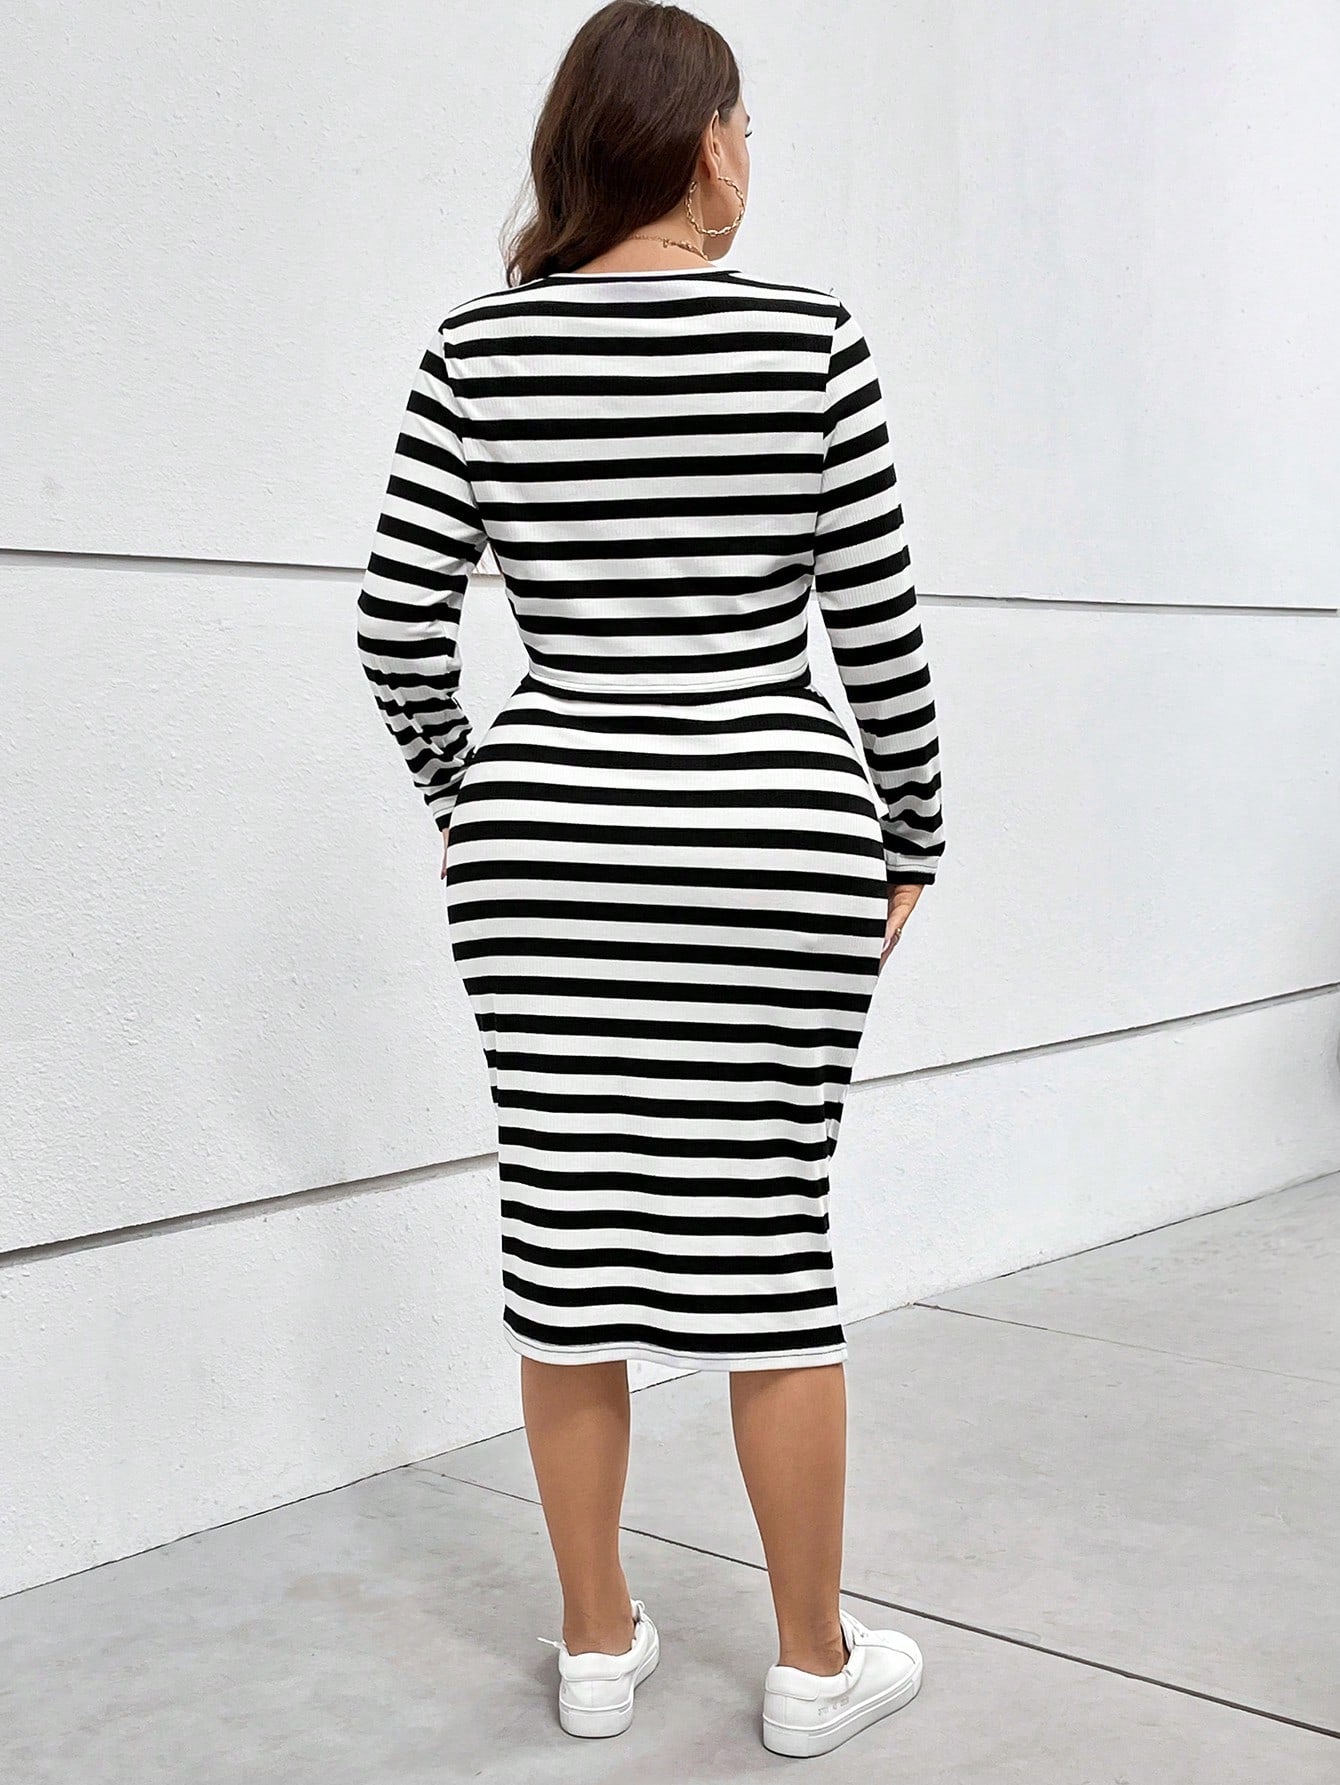 Women's Plus Size Striped Slim Fit Top And Skirt Set